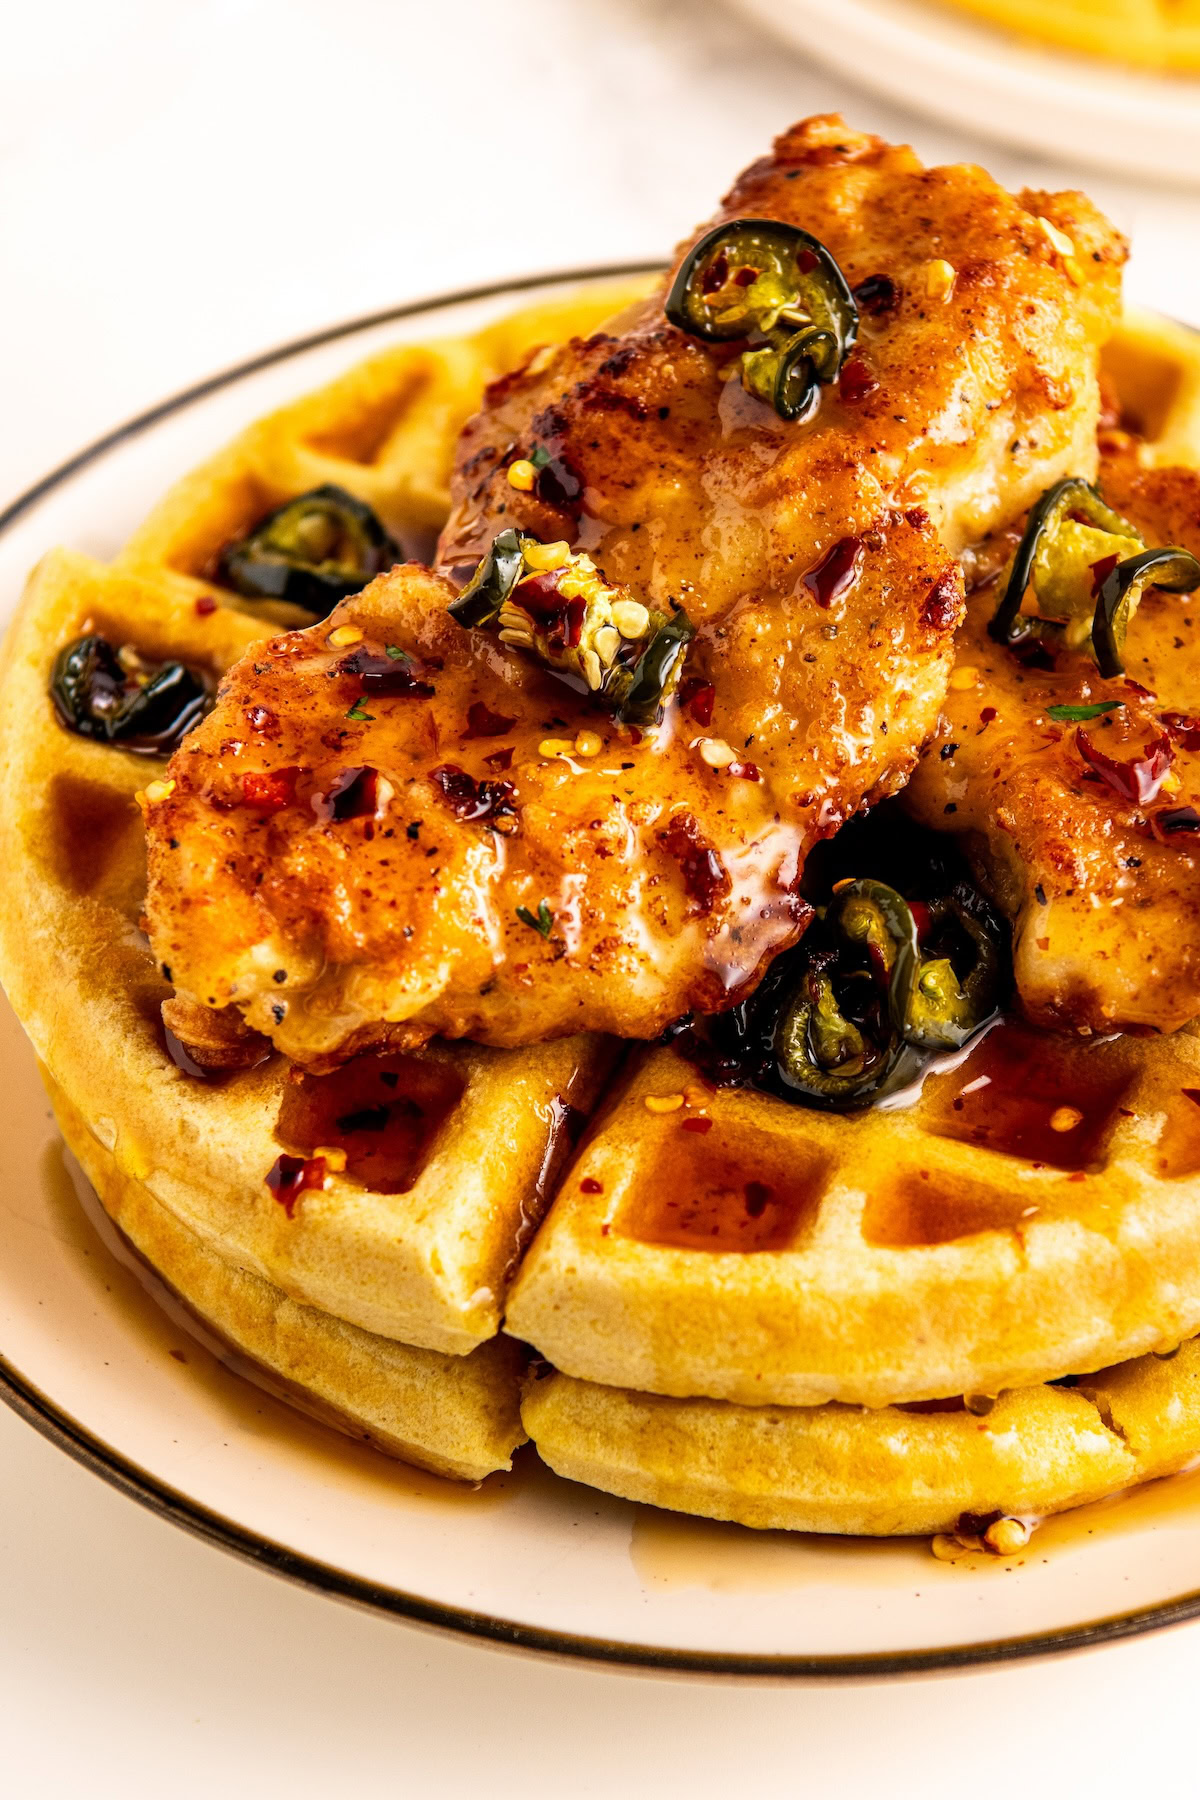 Southern style chicken and waffles on a plate with juicy fried chicken, two cornbread waffles and a hearty drizzle of hot honey.